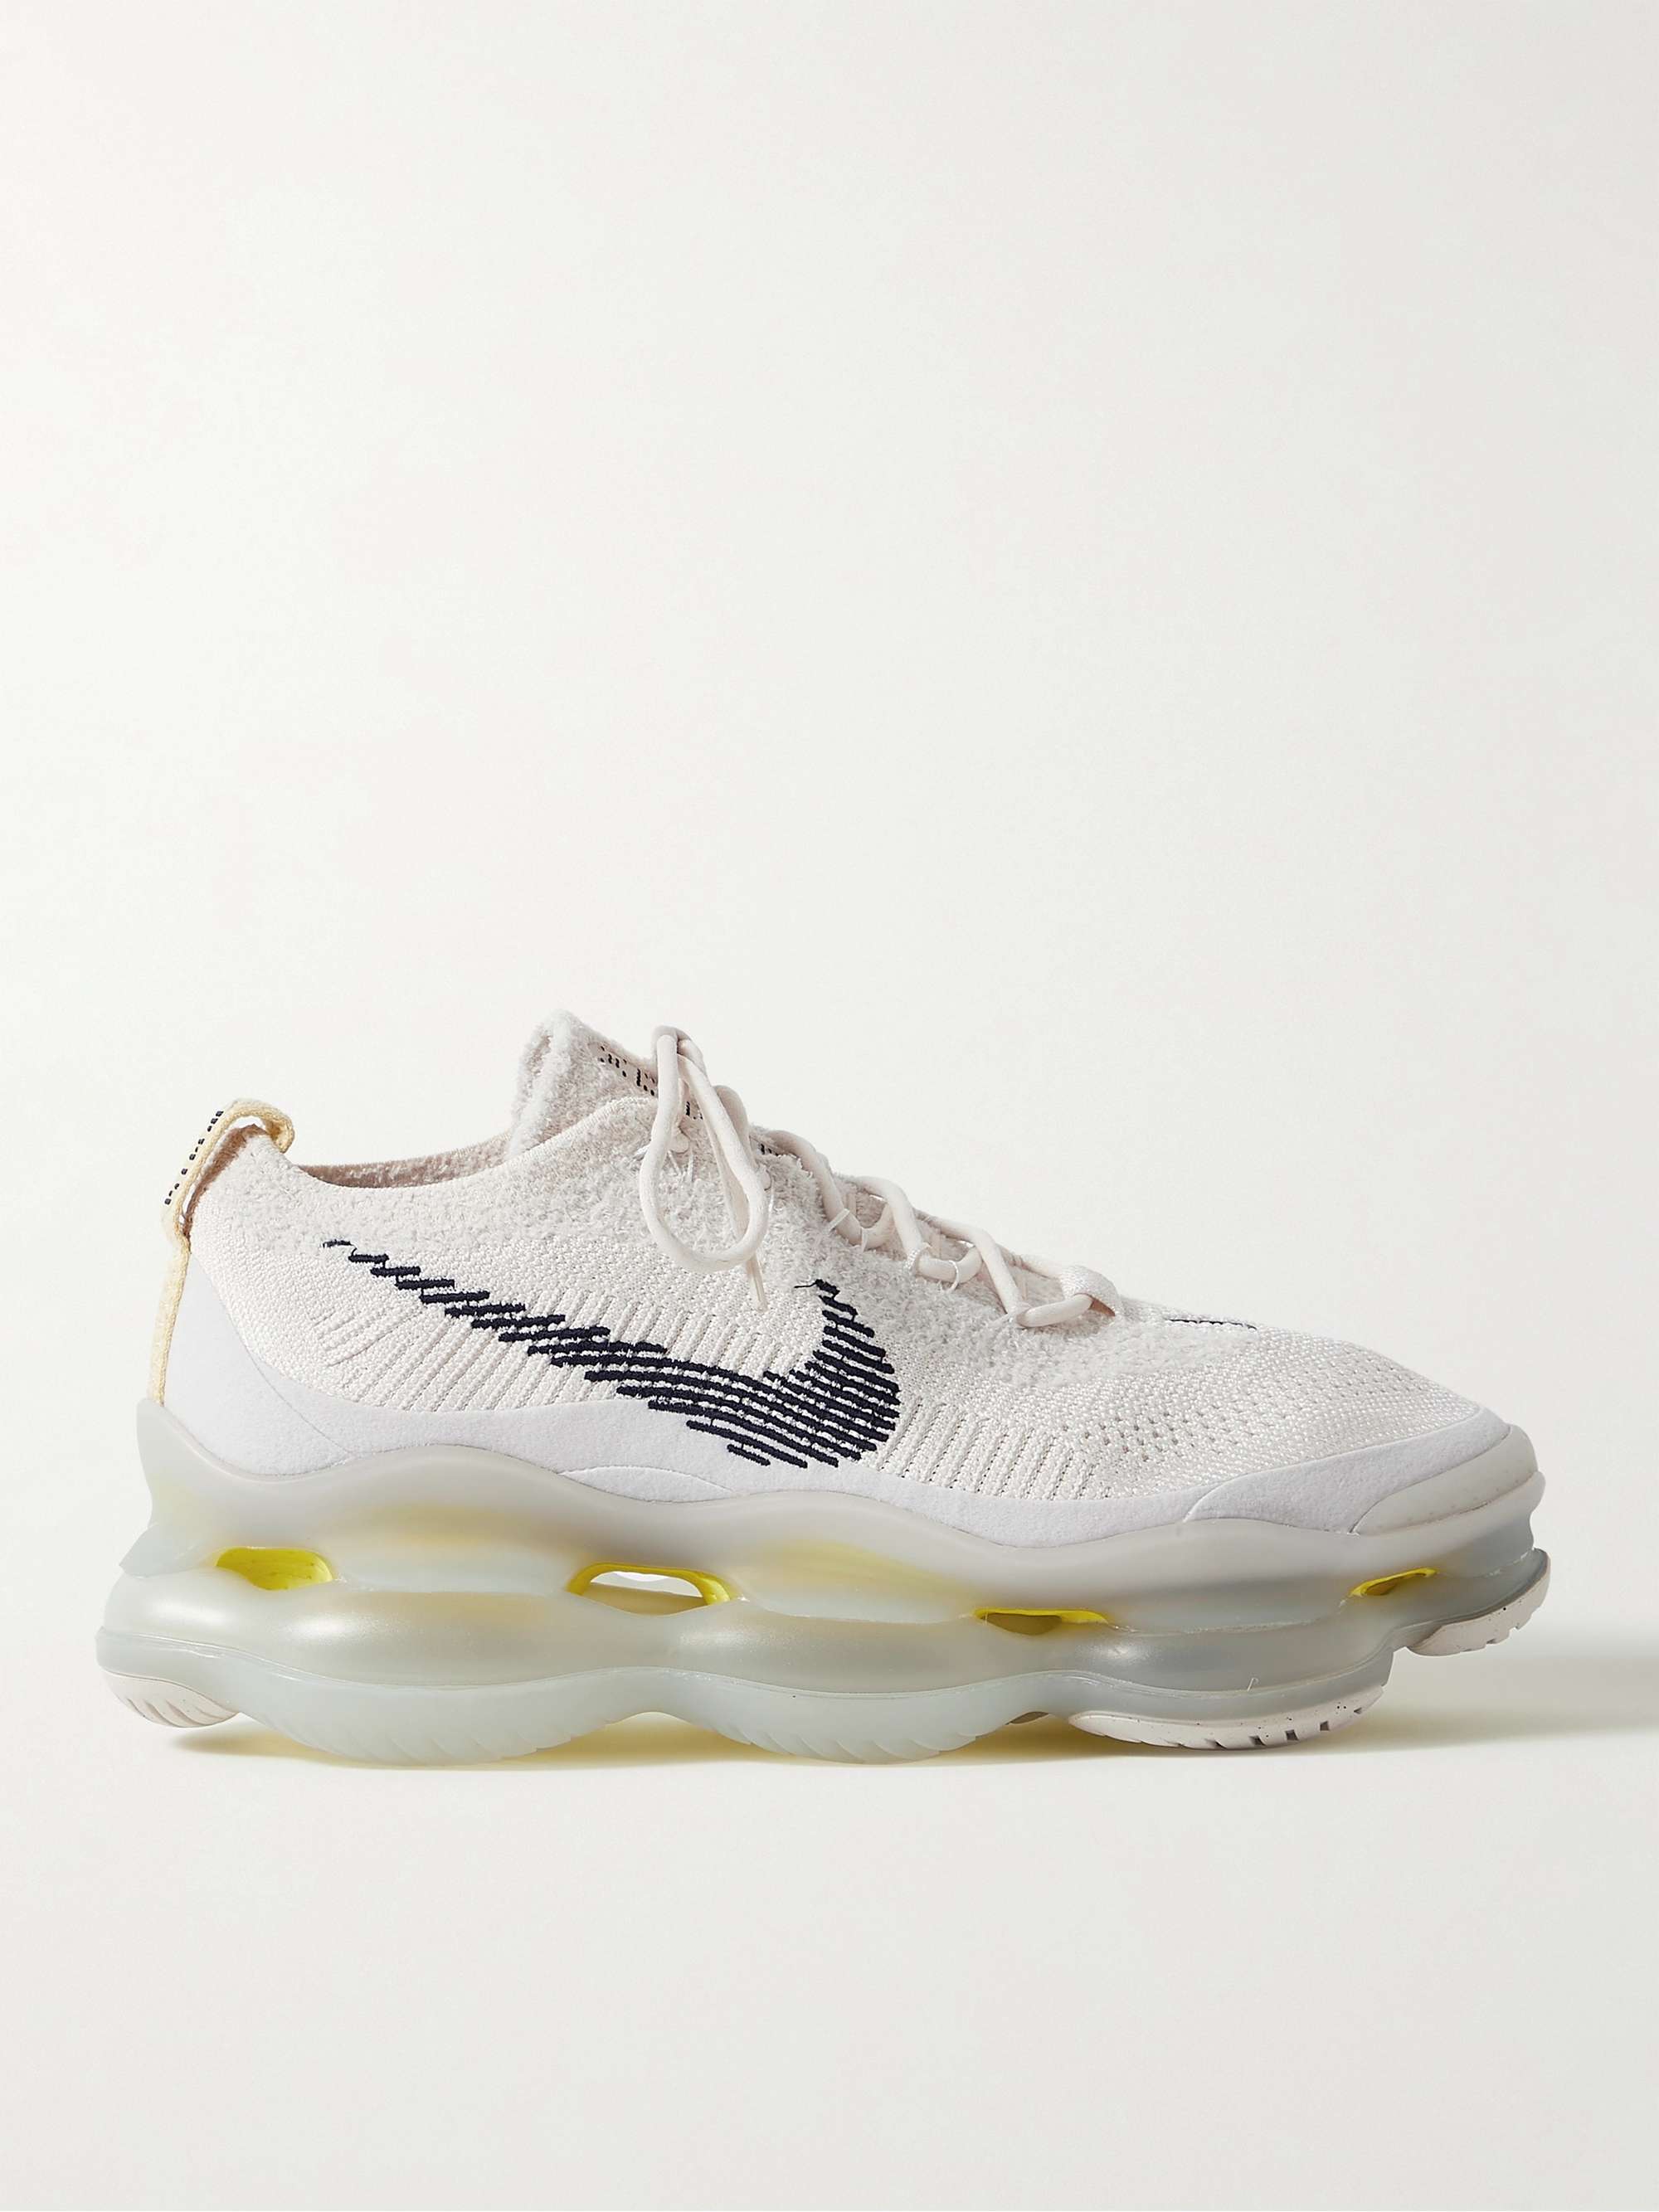 NIKE Air Max Scorpion Chenille Flyknit Sneakers | MR PORTER